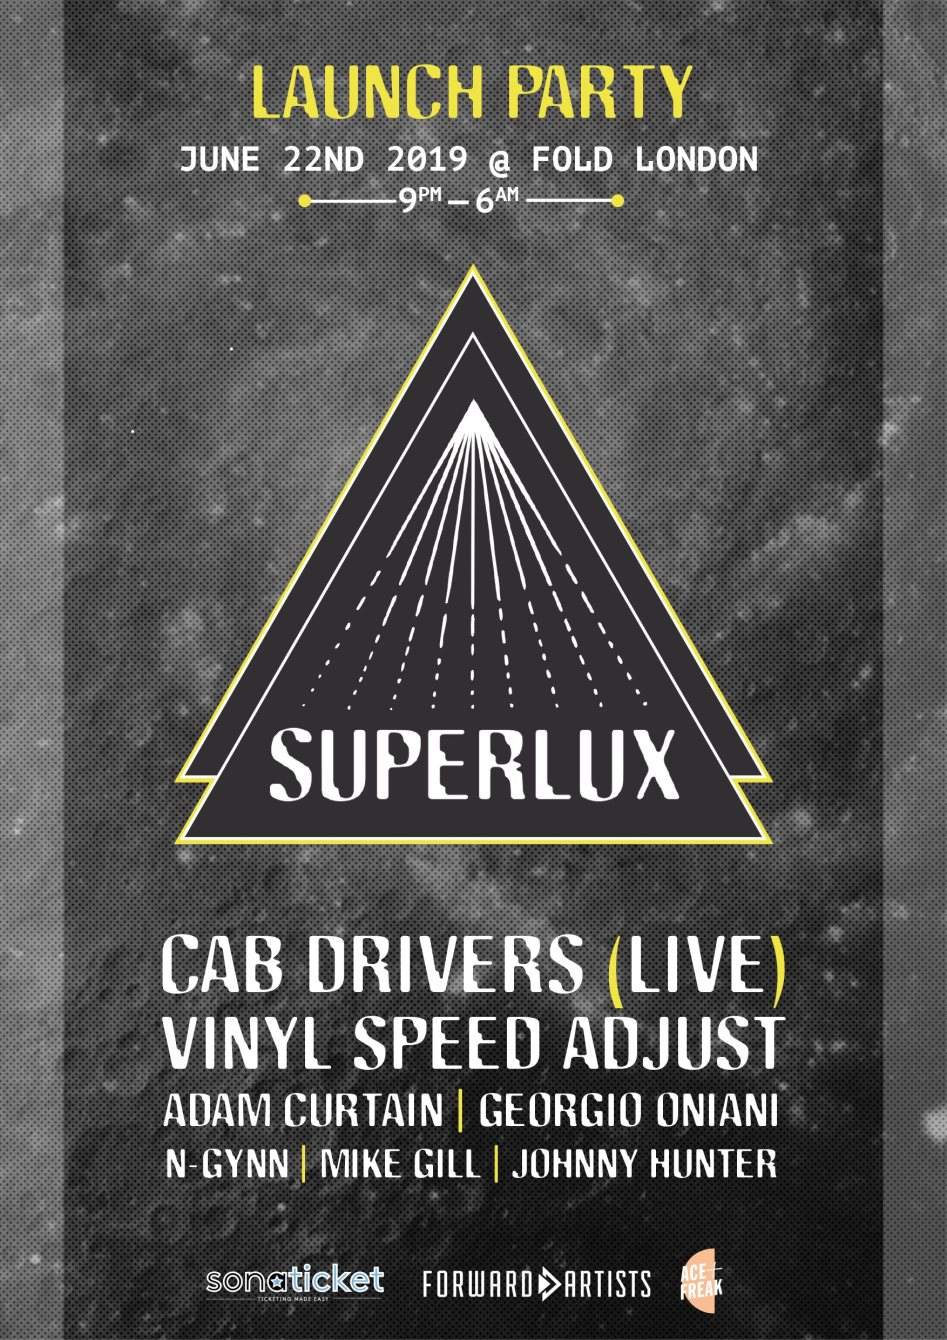 Cab Drivers + Vinyl Speed Adjust at Superlux Launch Party - フライヤー表